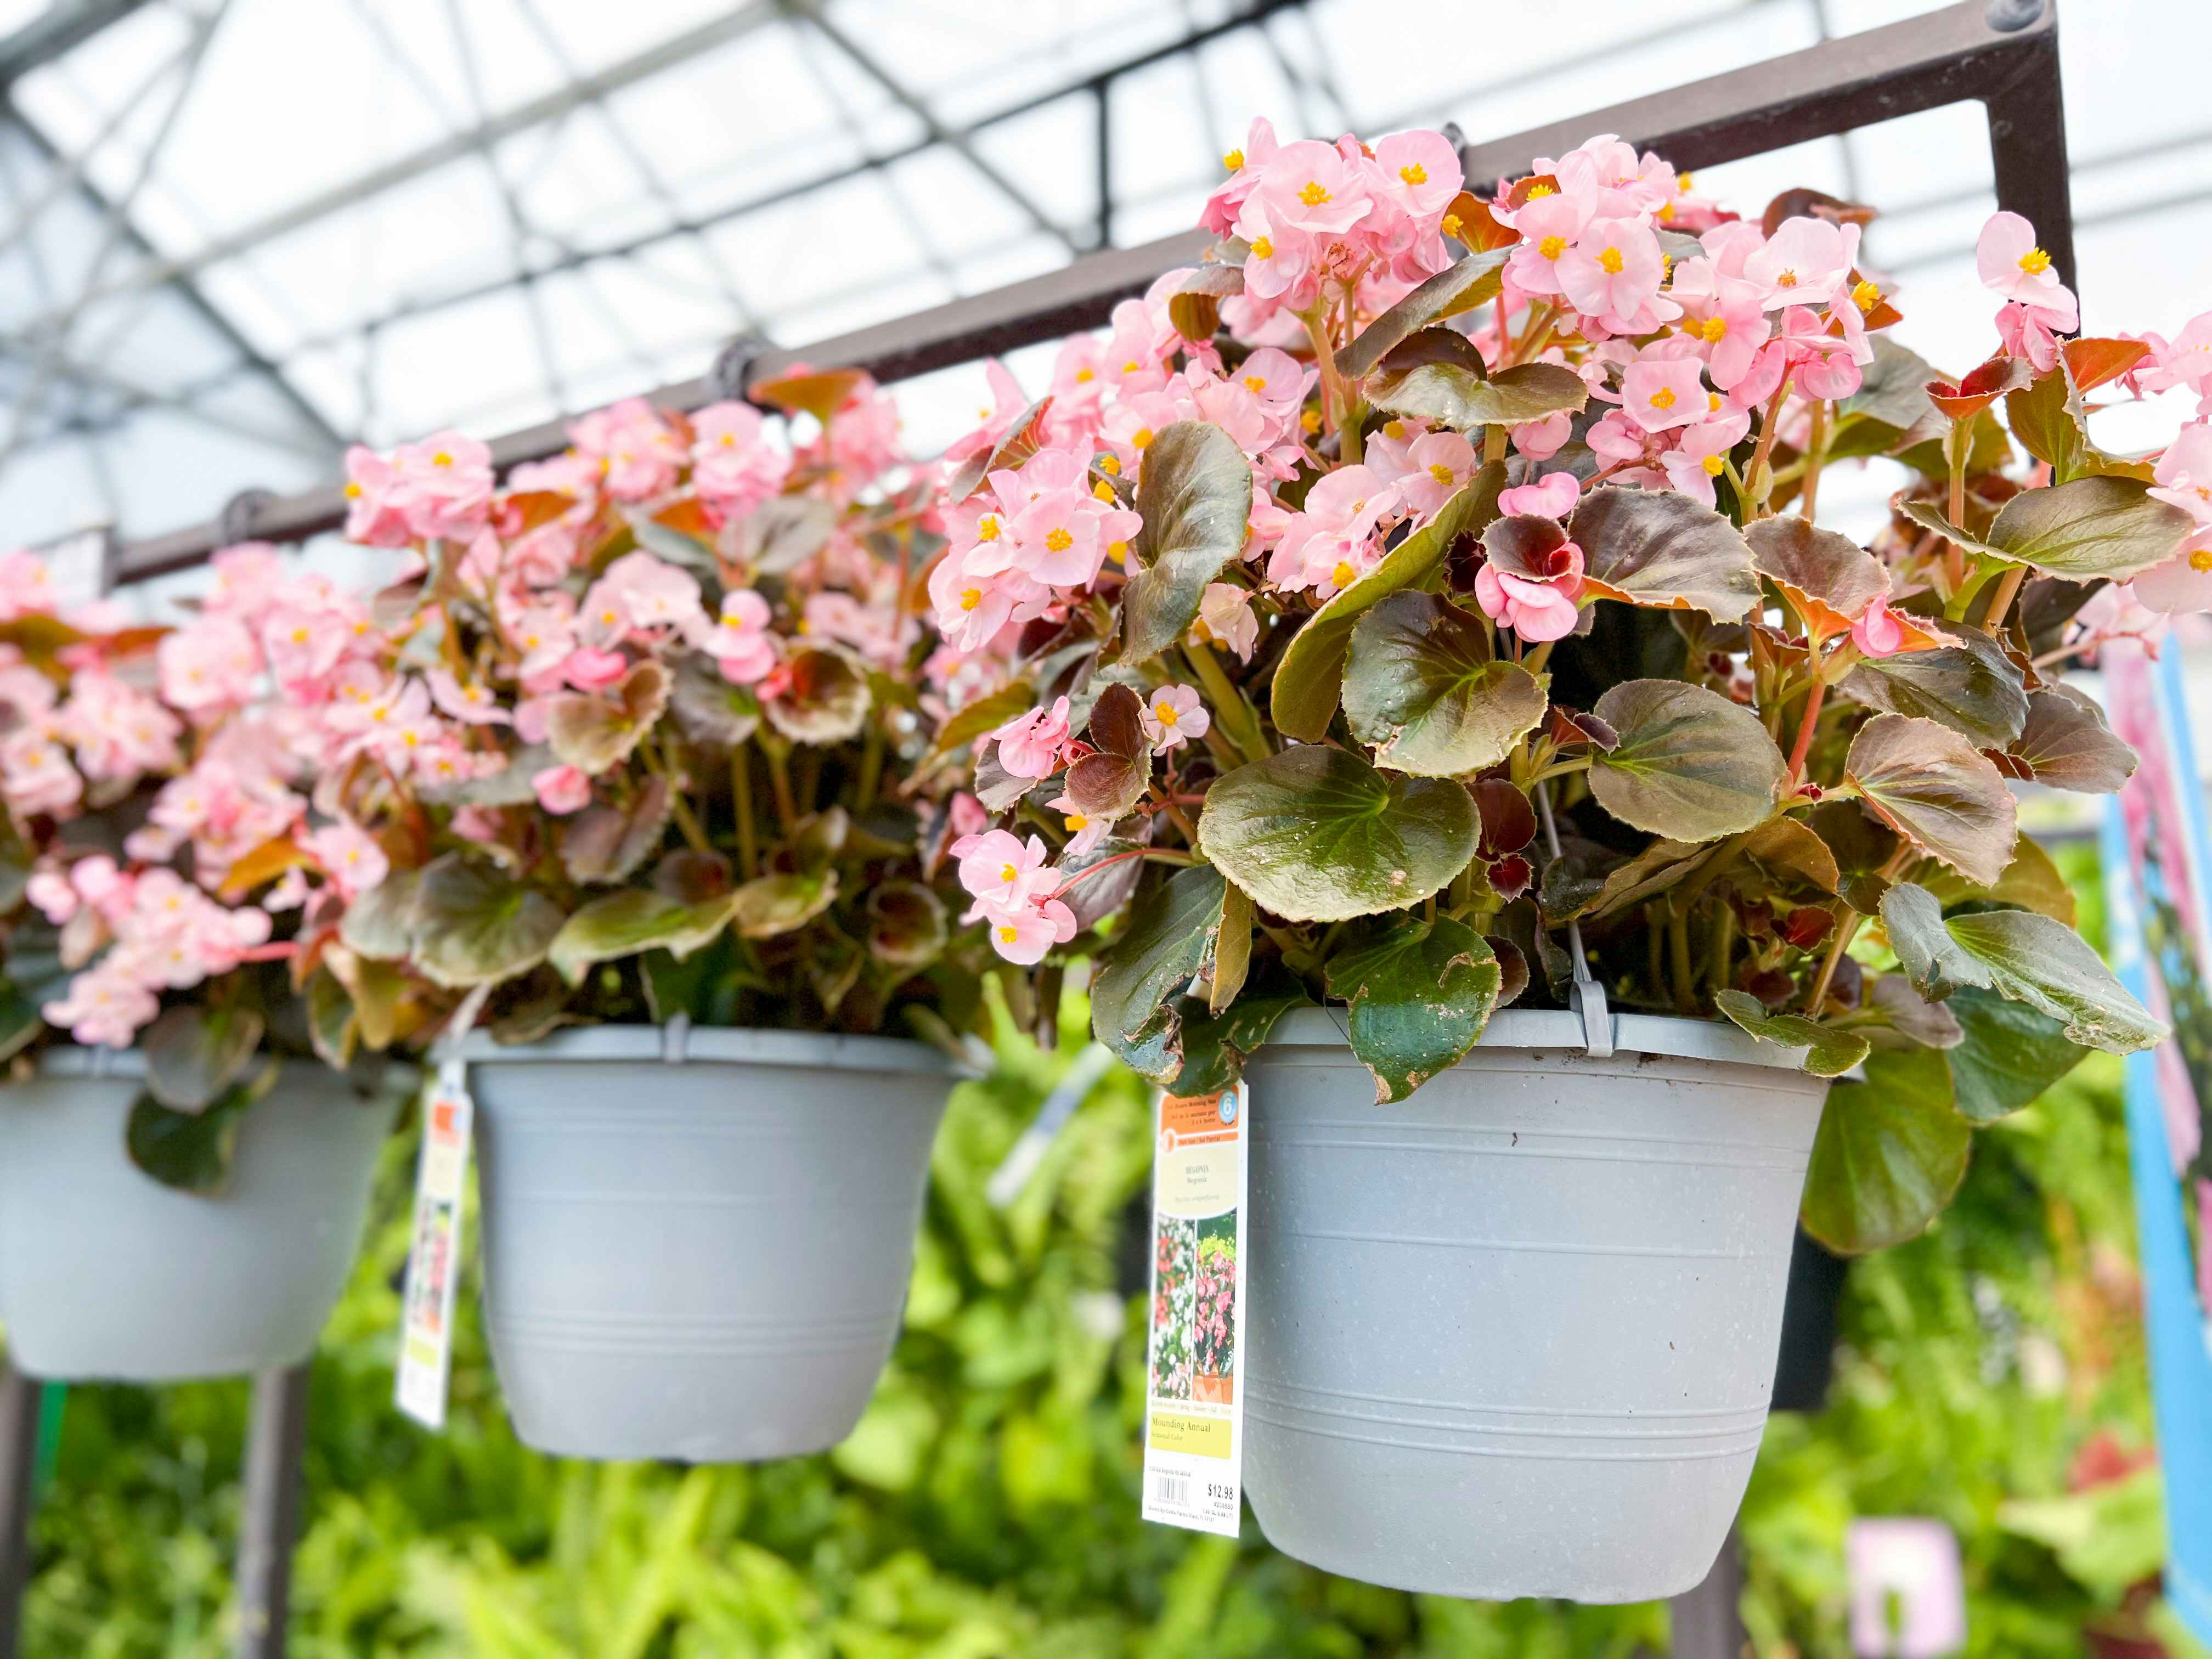 Lowe’s Springfest Deal: $10 Hanging Flower and Fern Baskets